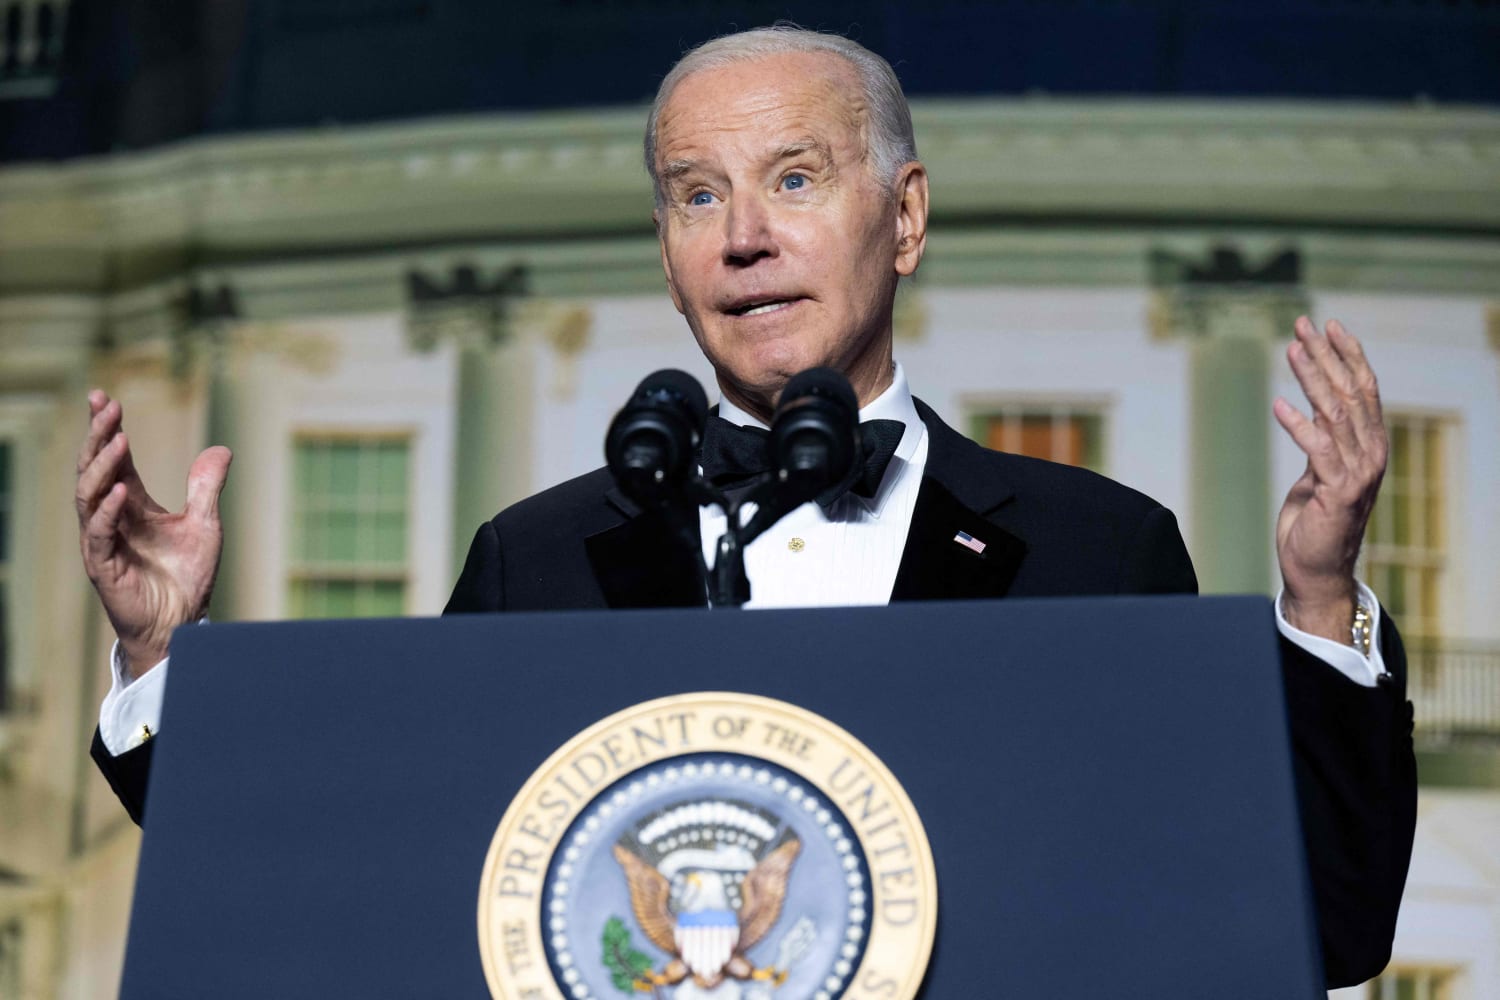 At White House correspondents' dinner, Biden vows to fight for Americans detained overseas